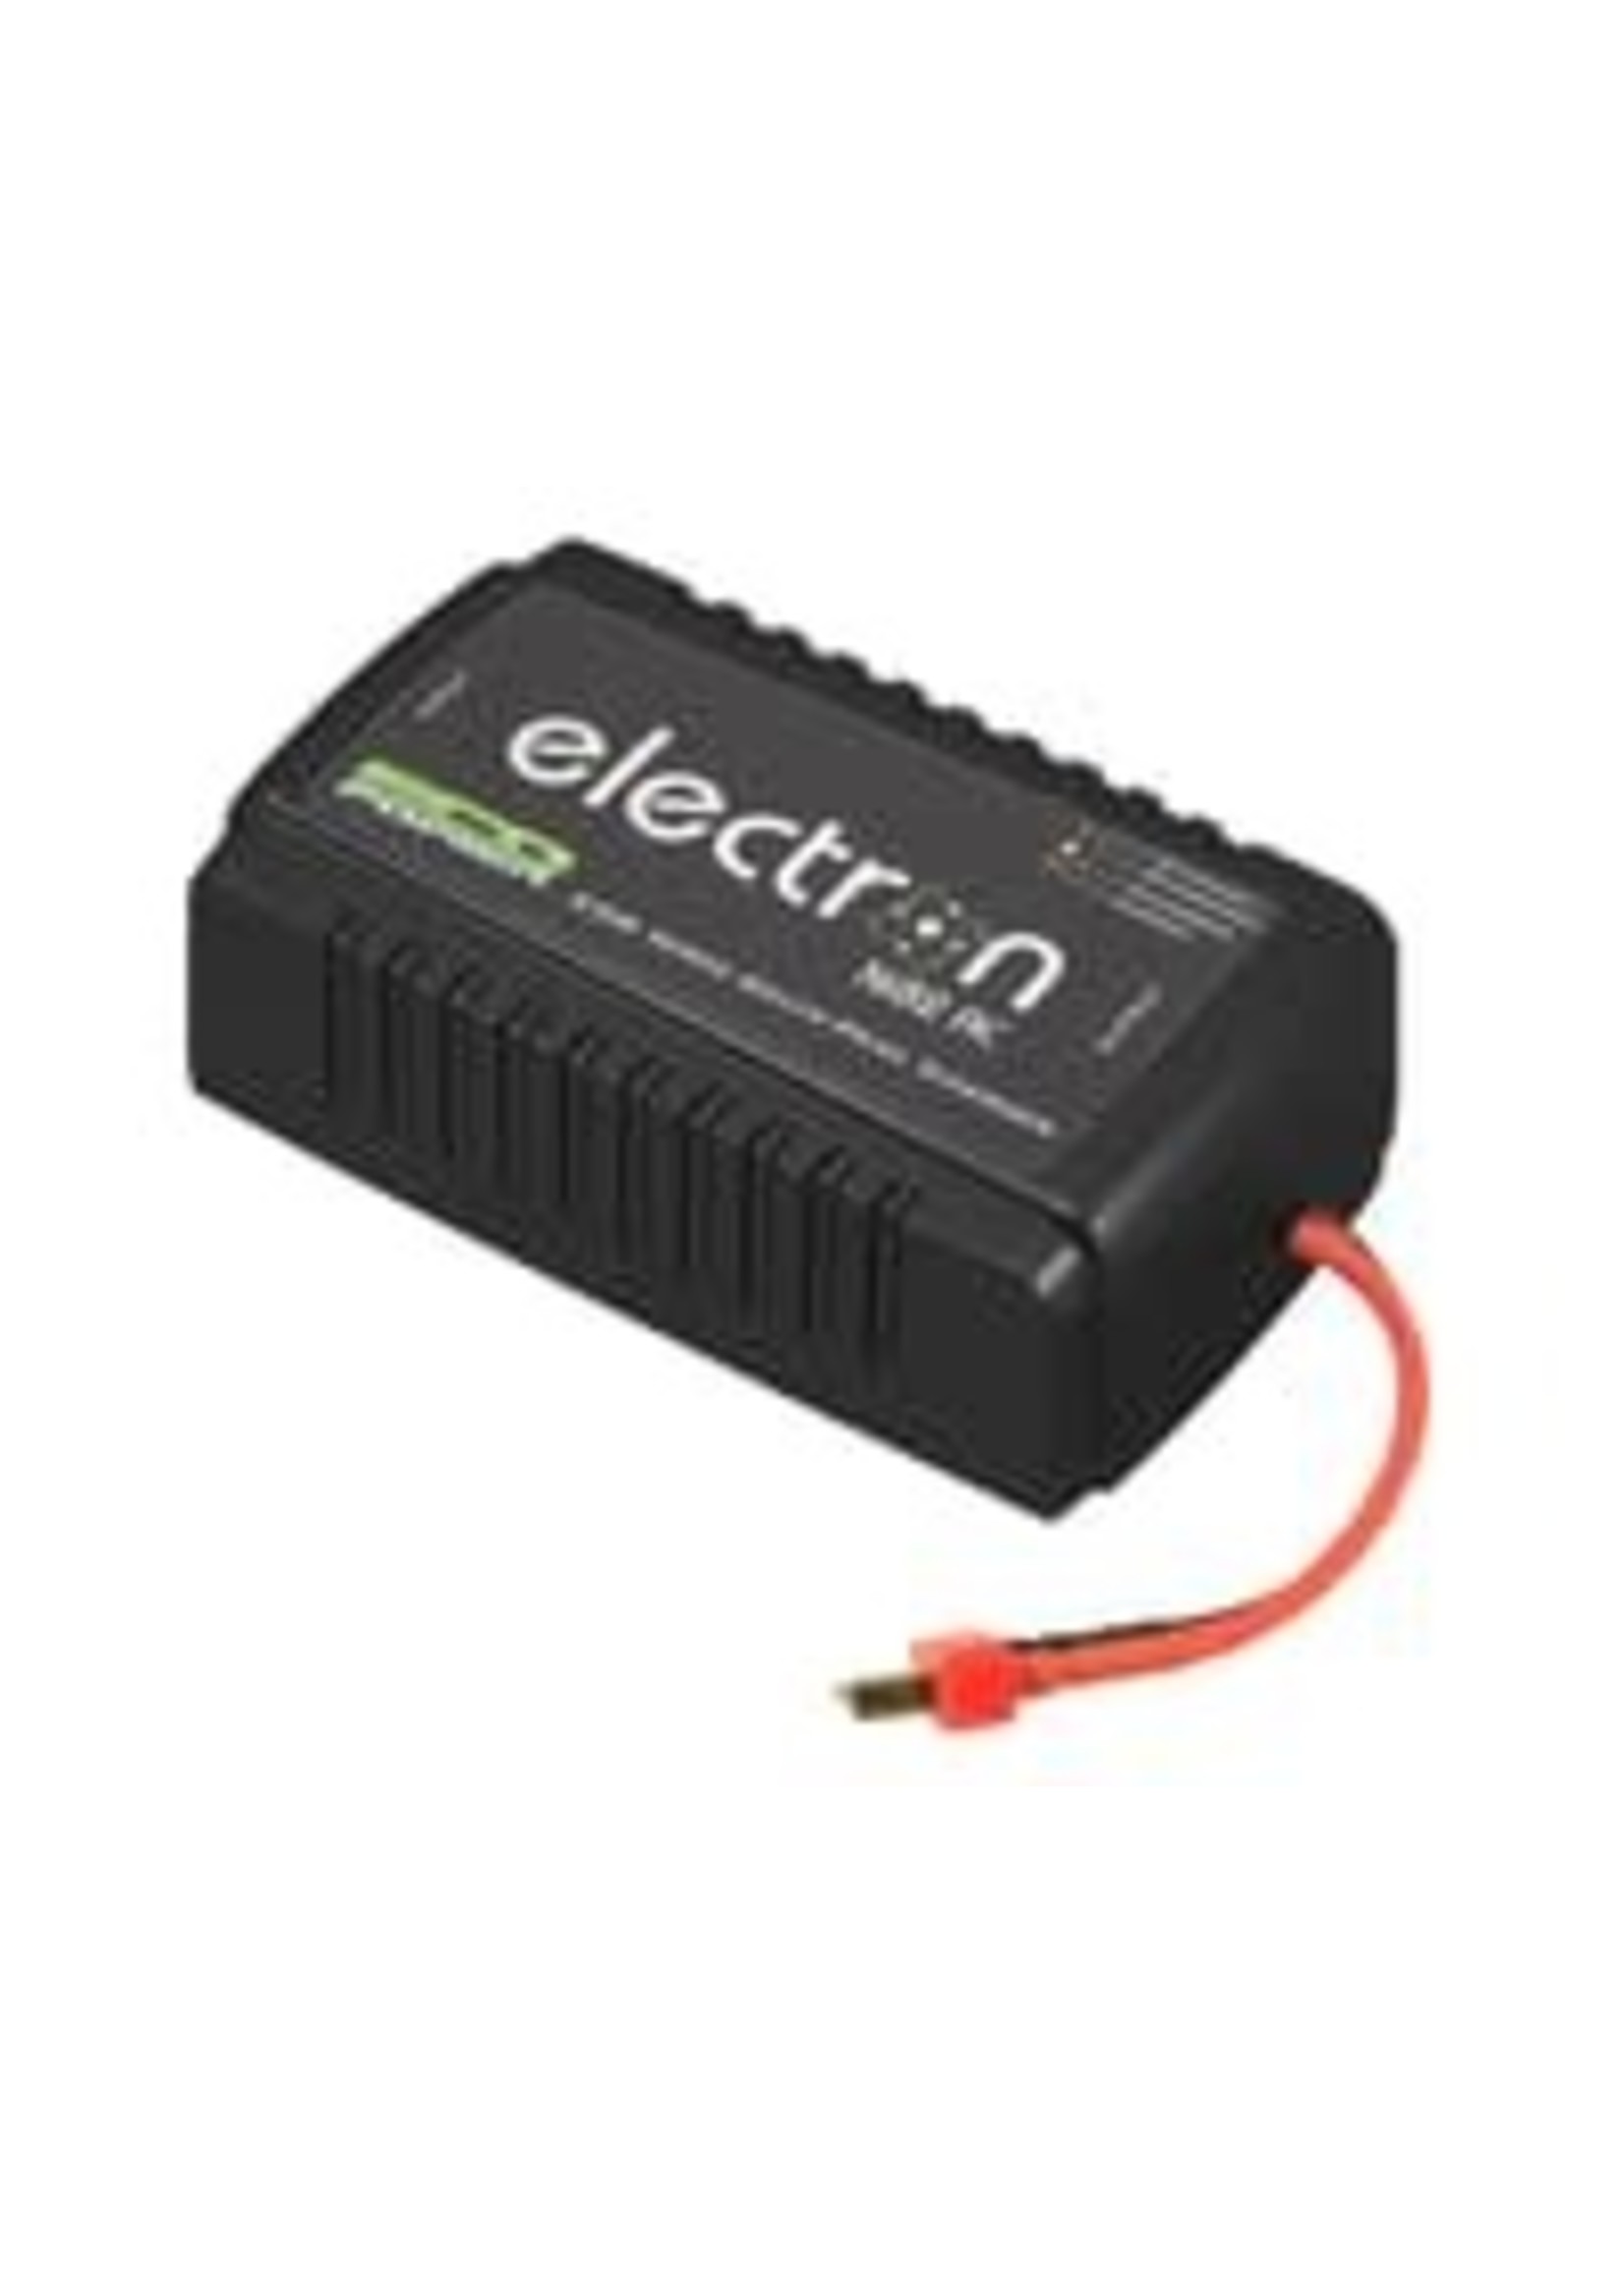 EcoPower ECP-1003 EcoPower "Electron Ni82 AC" NiMH/NiCd Battery Charger (1-8 Cells/2A/25W)